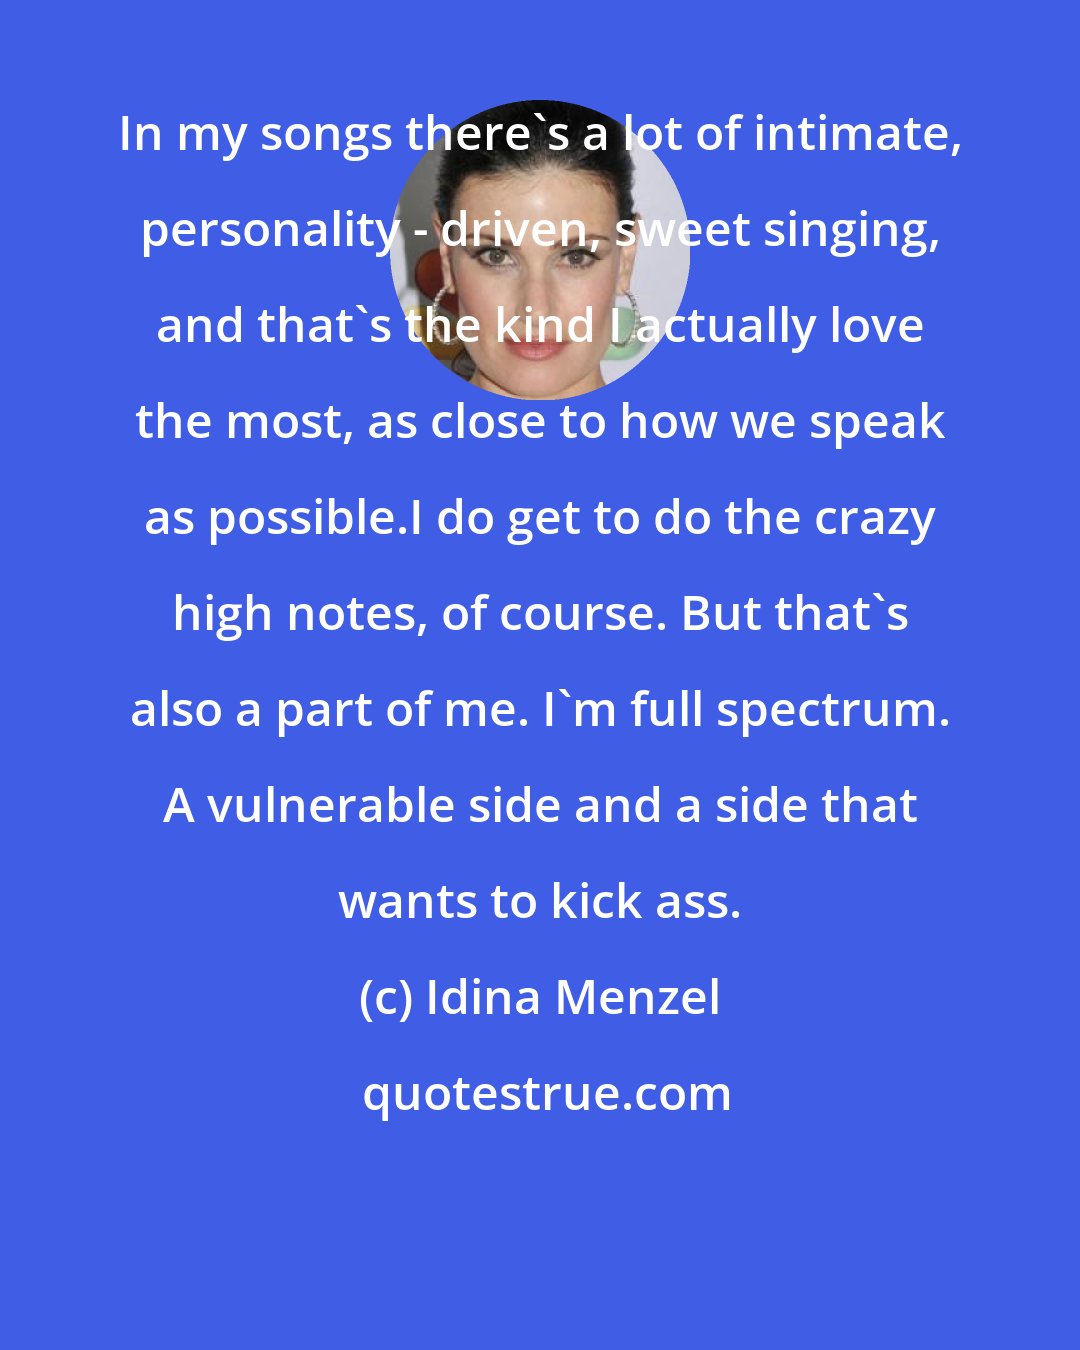 Idina Menzel: In my songs there's a lot of intimate, personality - driven, sweet singing, and that's the kind I actually love the most, as close to how we speak as possible.I do get to do the crazy high notes, of course. But that's also a part of me. I'm full spectrum. A vulnerable side and a side that wants to kick ass.